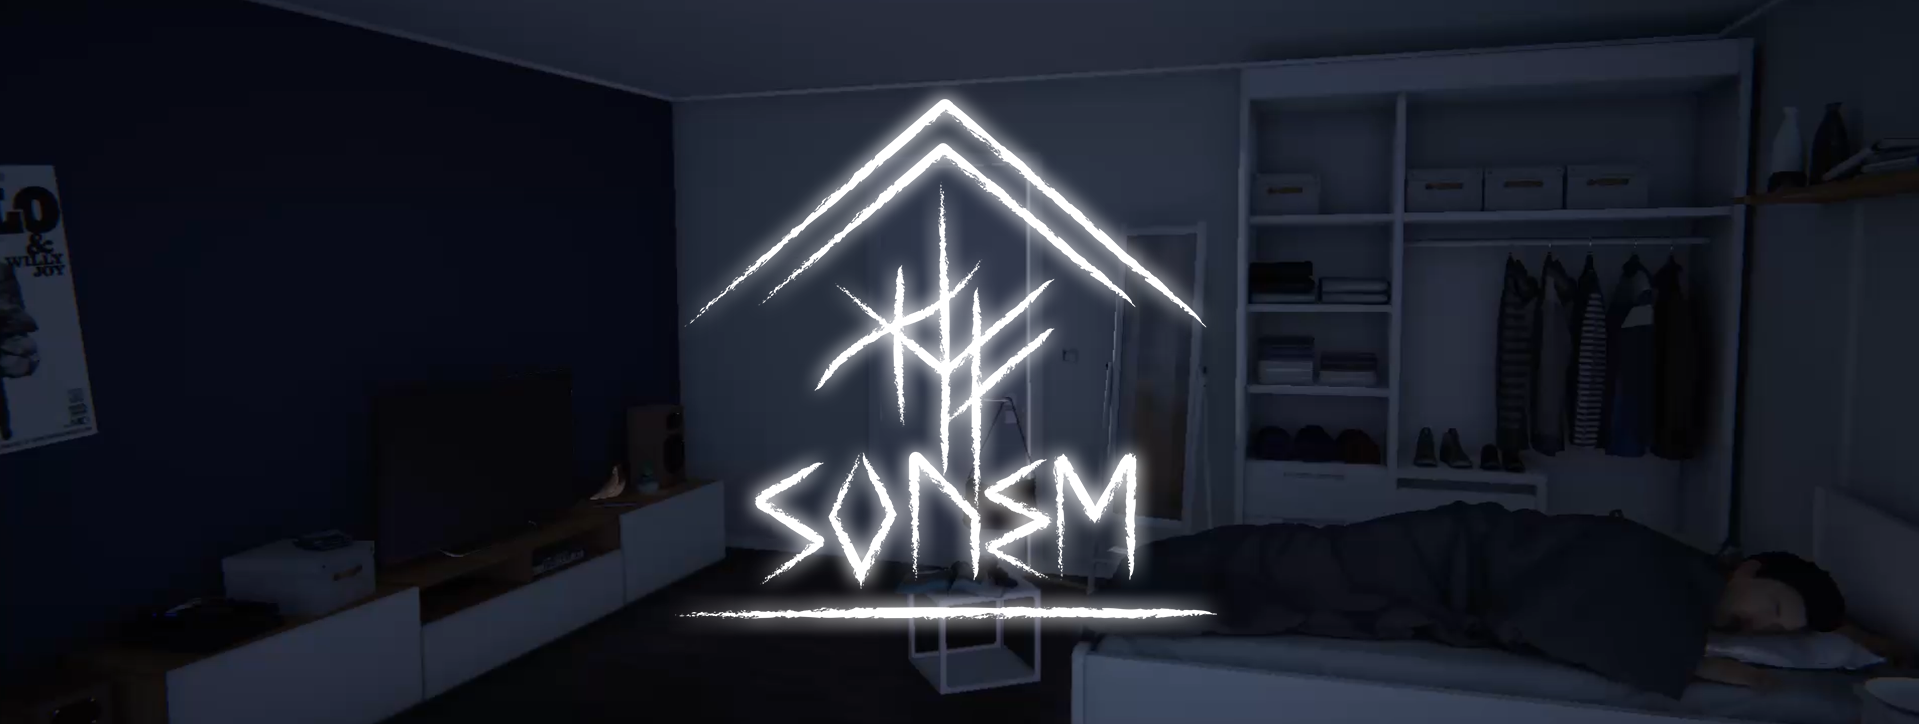 Sonem: Save Your thoughts